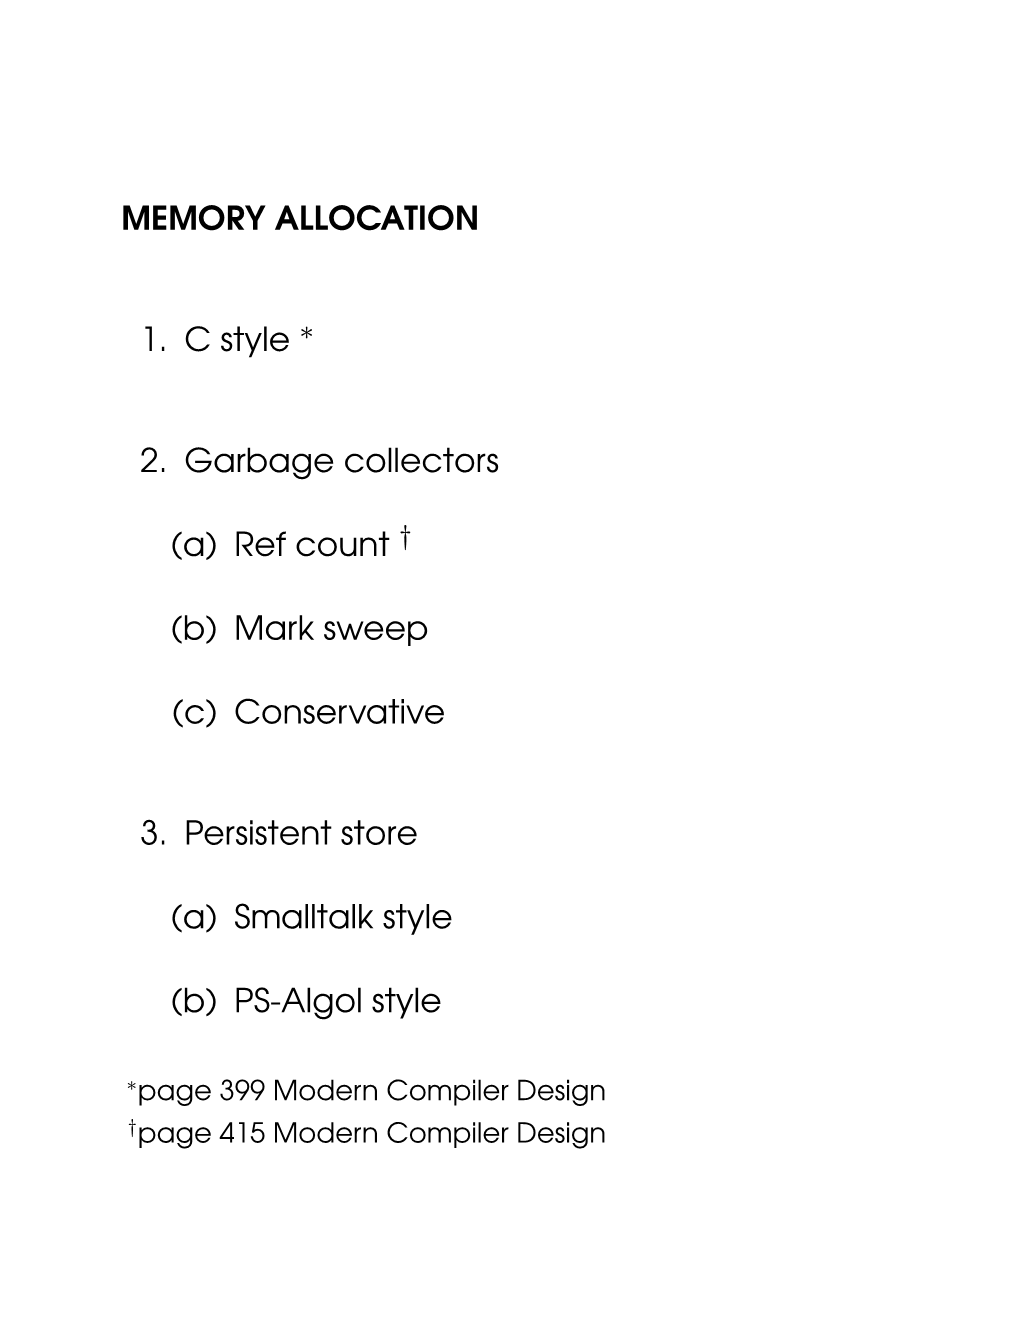 MEMORY ALLOCATION 1. C Style 2. Garbage Collectors (A) Ref Count (B